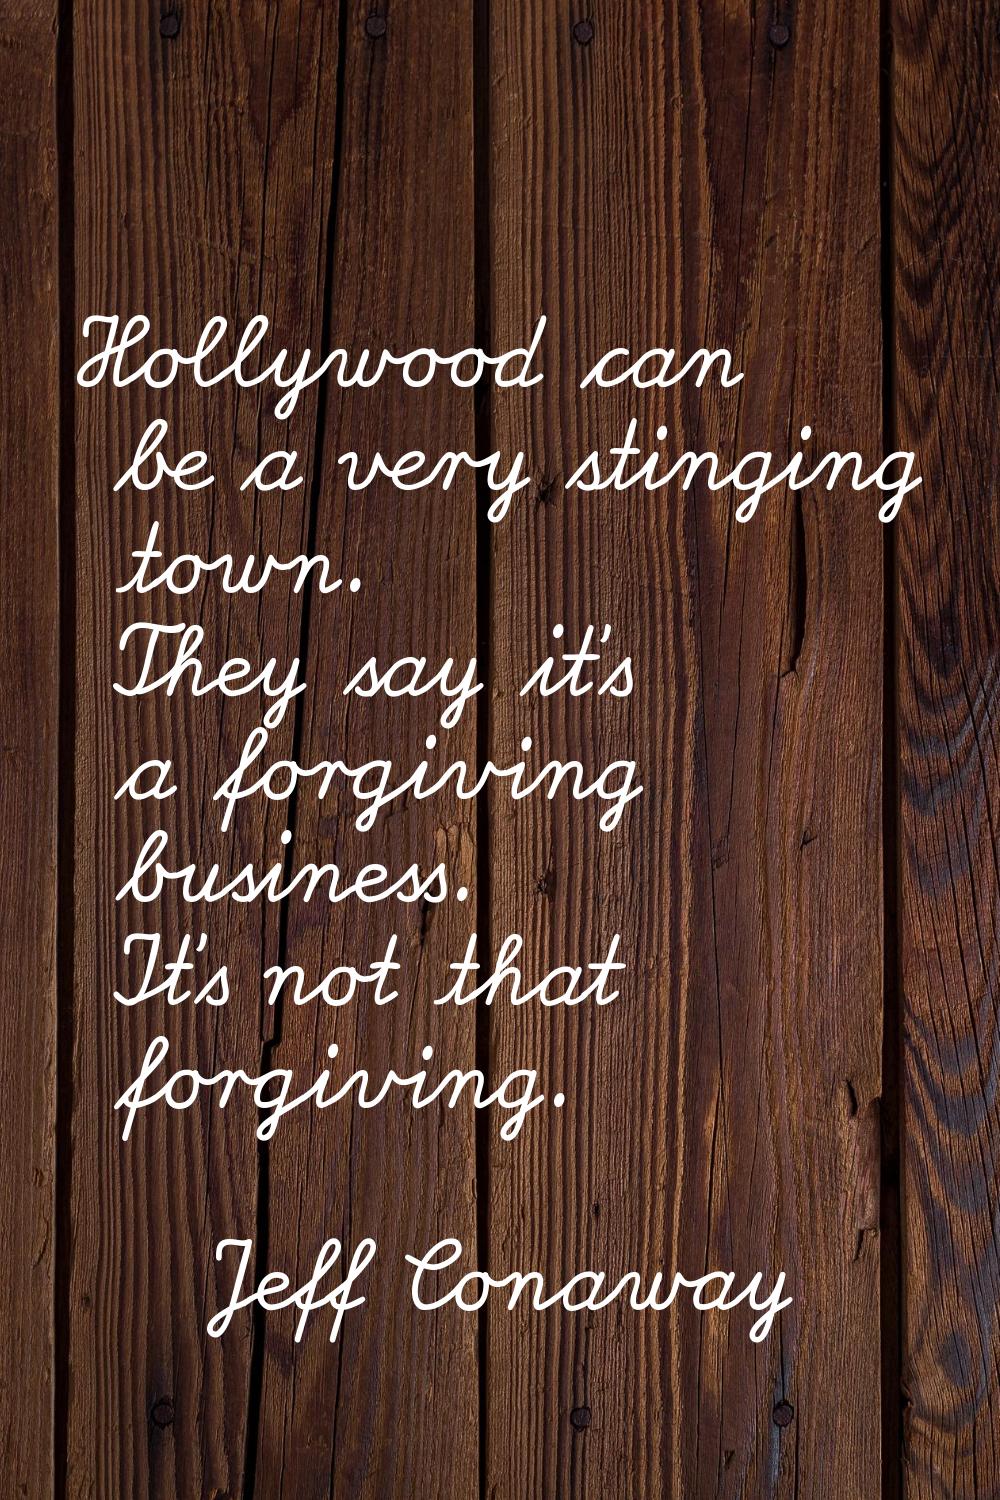 Hollywood can be a very stinging town. They say it's a forgiving business. It's not that forgiving.